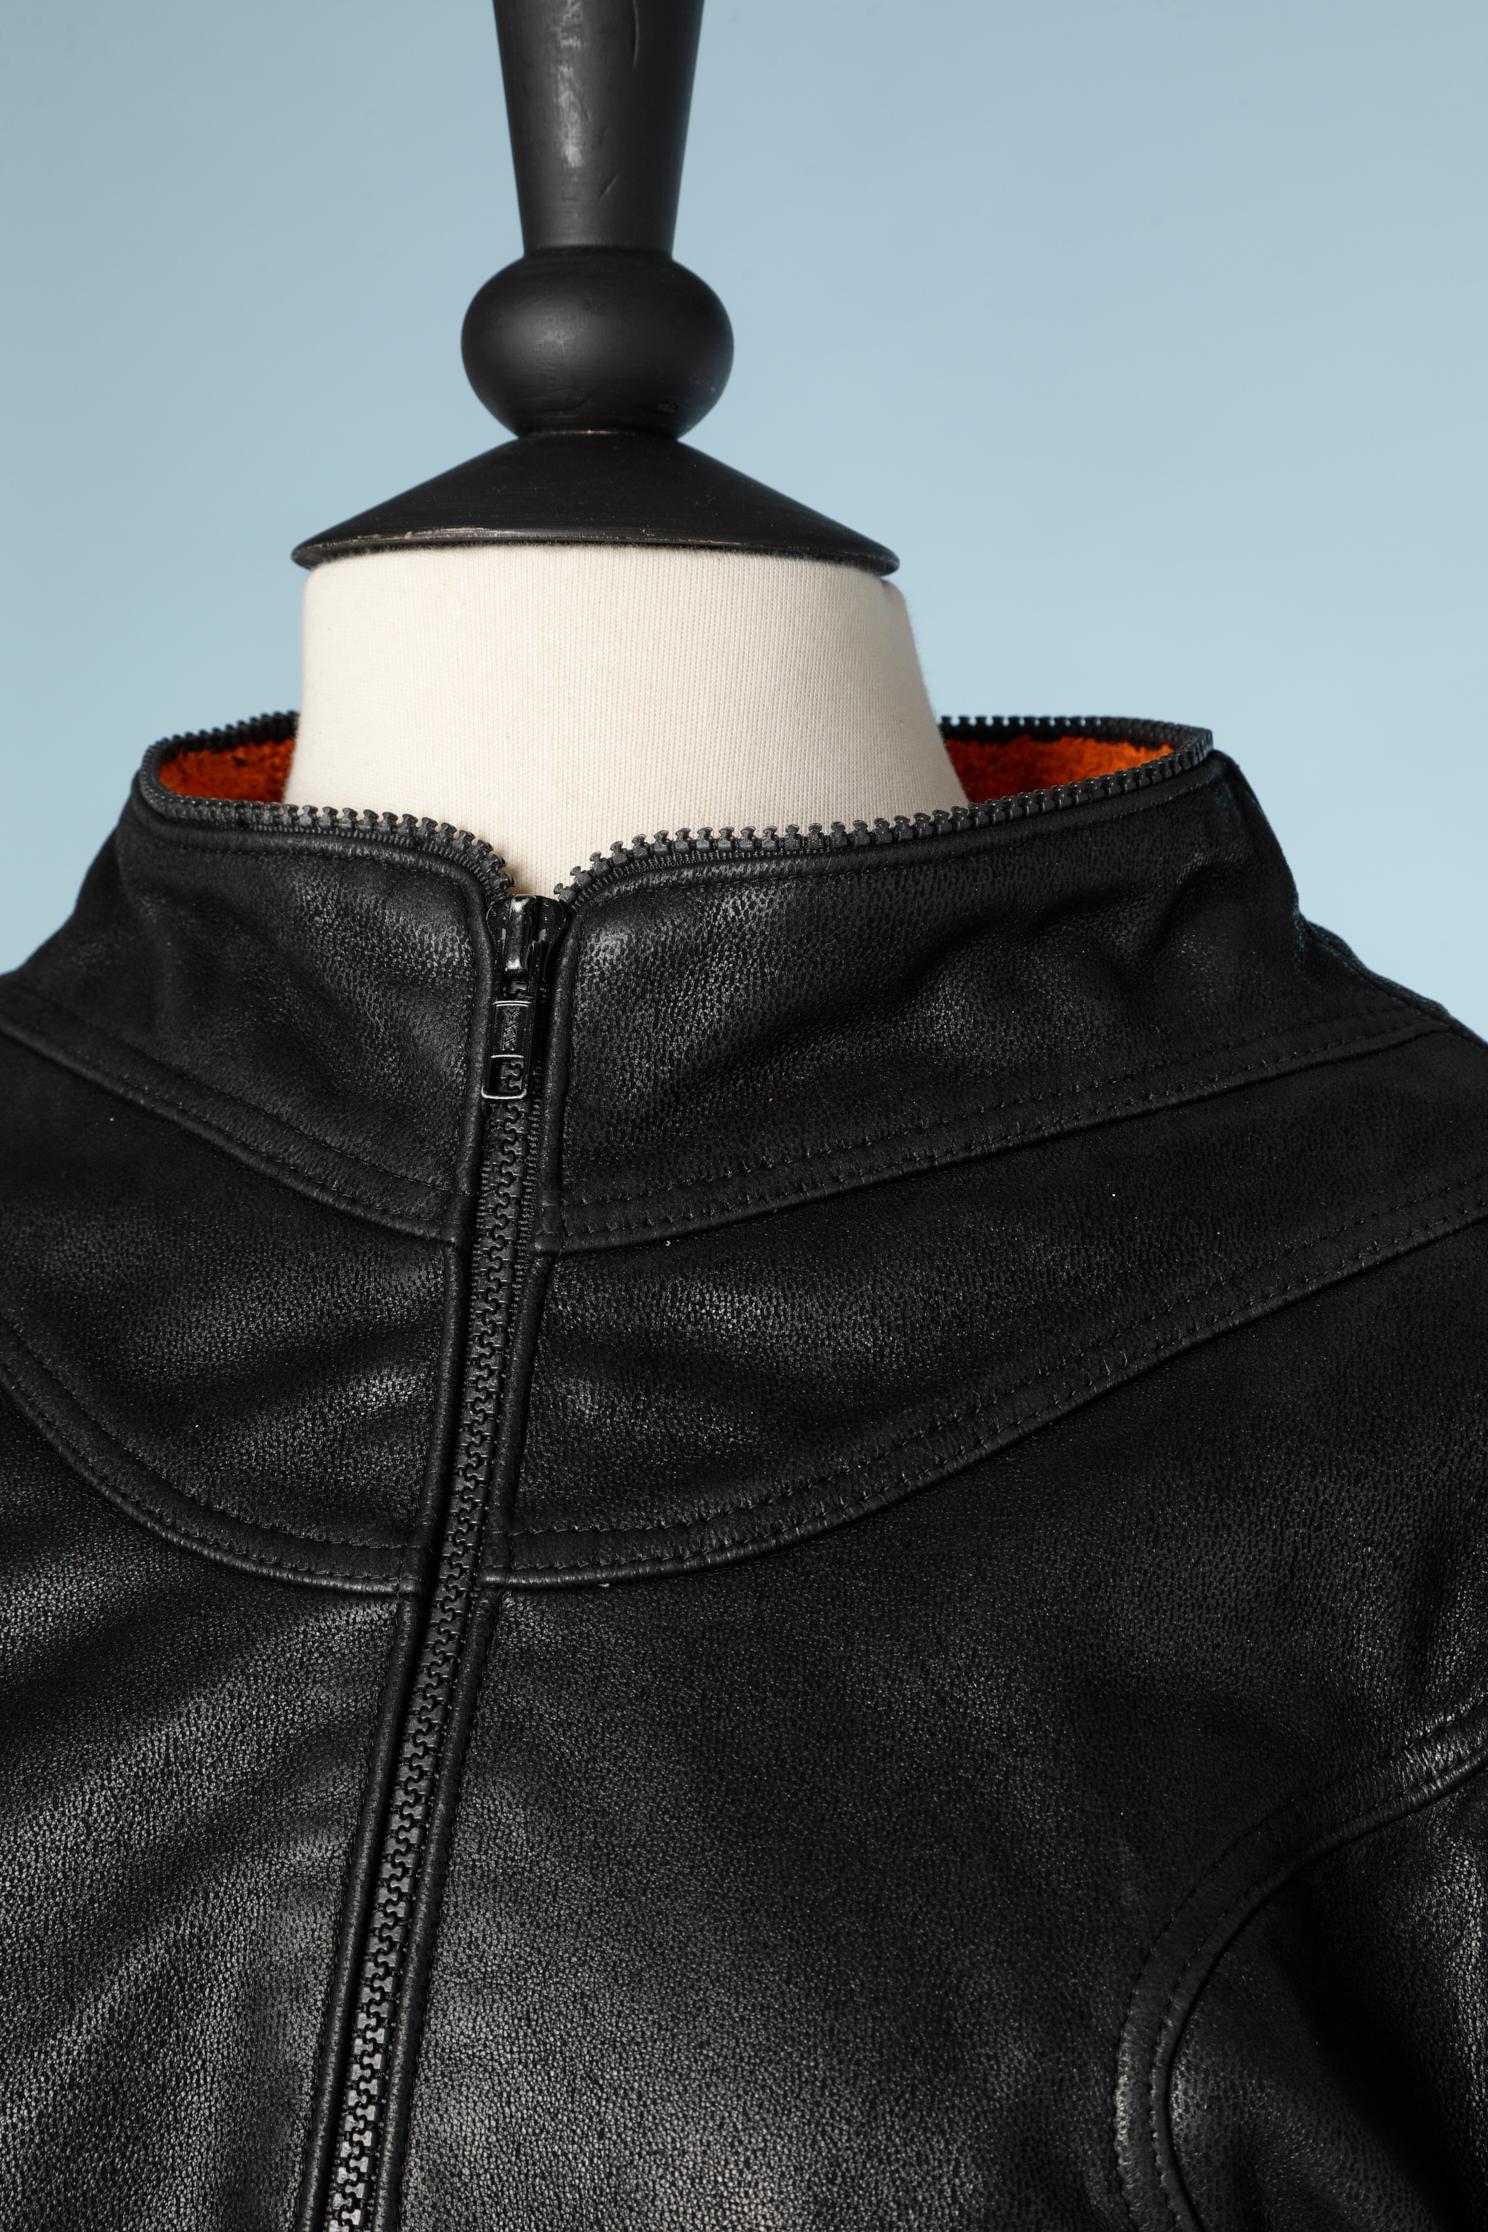 Black leather biker jacket with orange and blue terry towelling lining. (Orange inside the body and blue inside the sleeves.)
SIZE: 38 ( small) 
Half zip embellishment all along the edge of the jacket ( neck-line, bottom edge and cuffs)